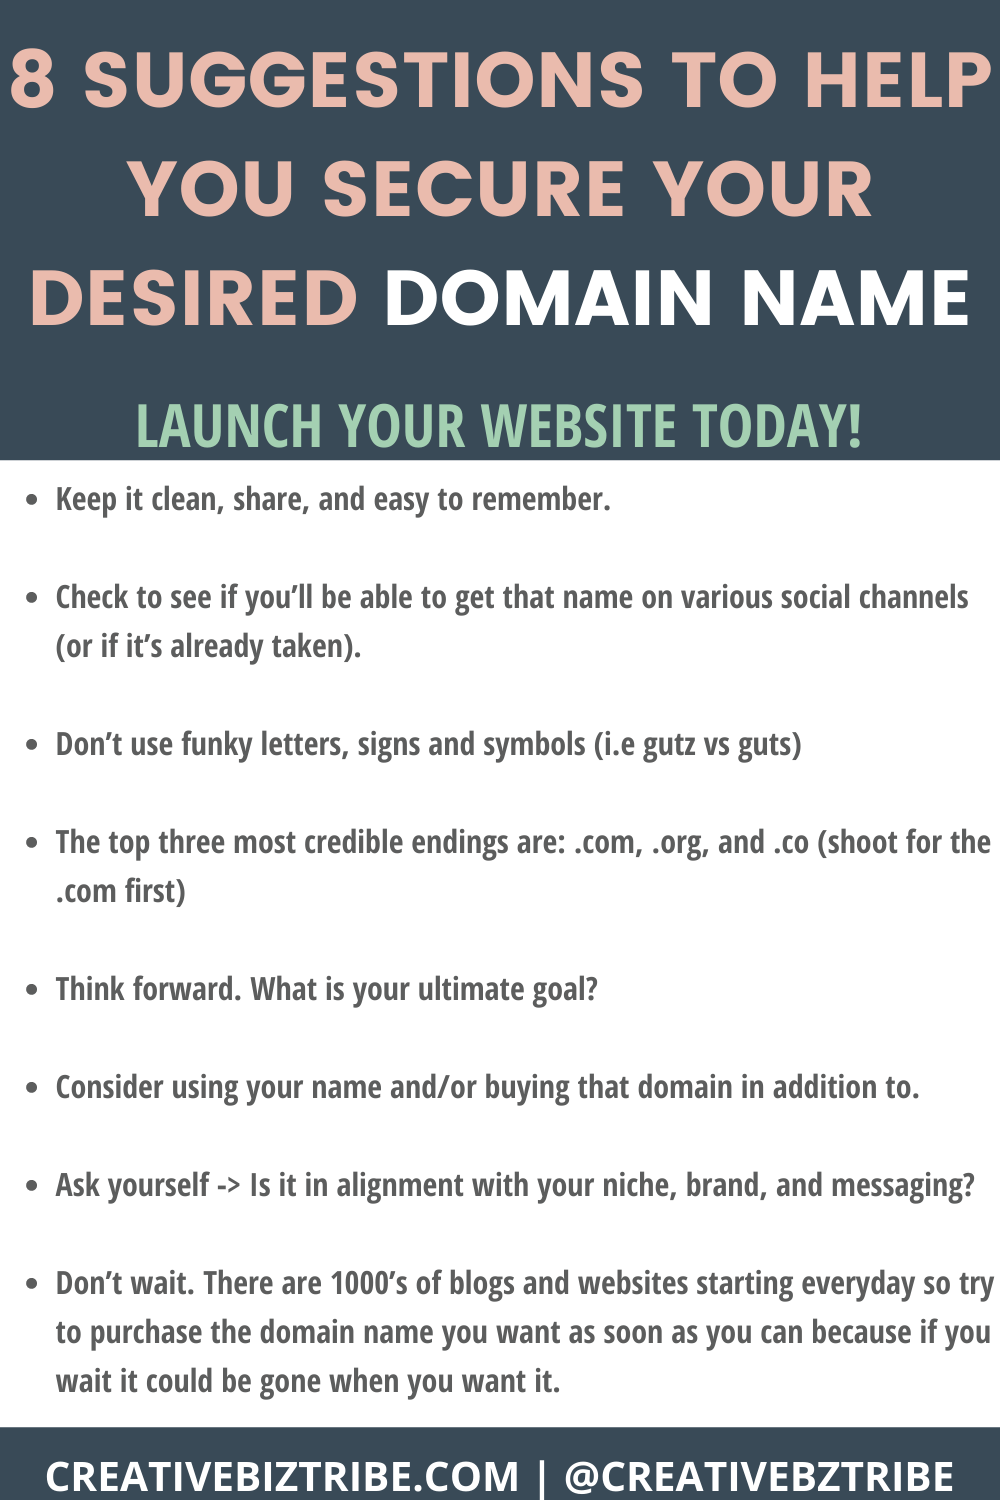 8 suggestions to help you secure your desired domain name Step by Step Instructions for How to Start a Blog creativebiztribe.com #blogging #startablog #bloggingtips